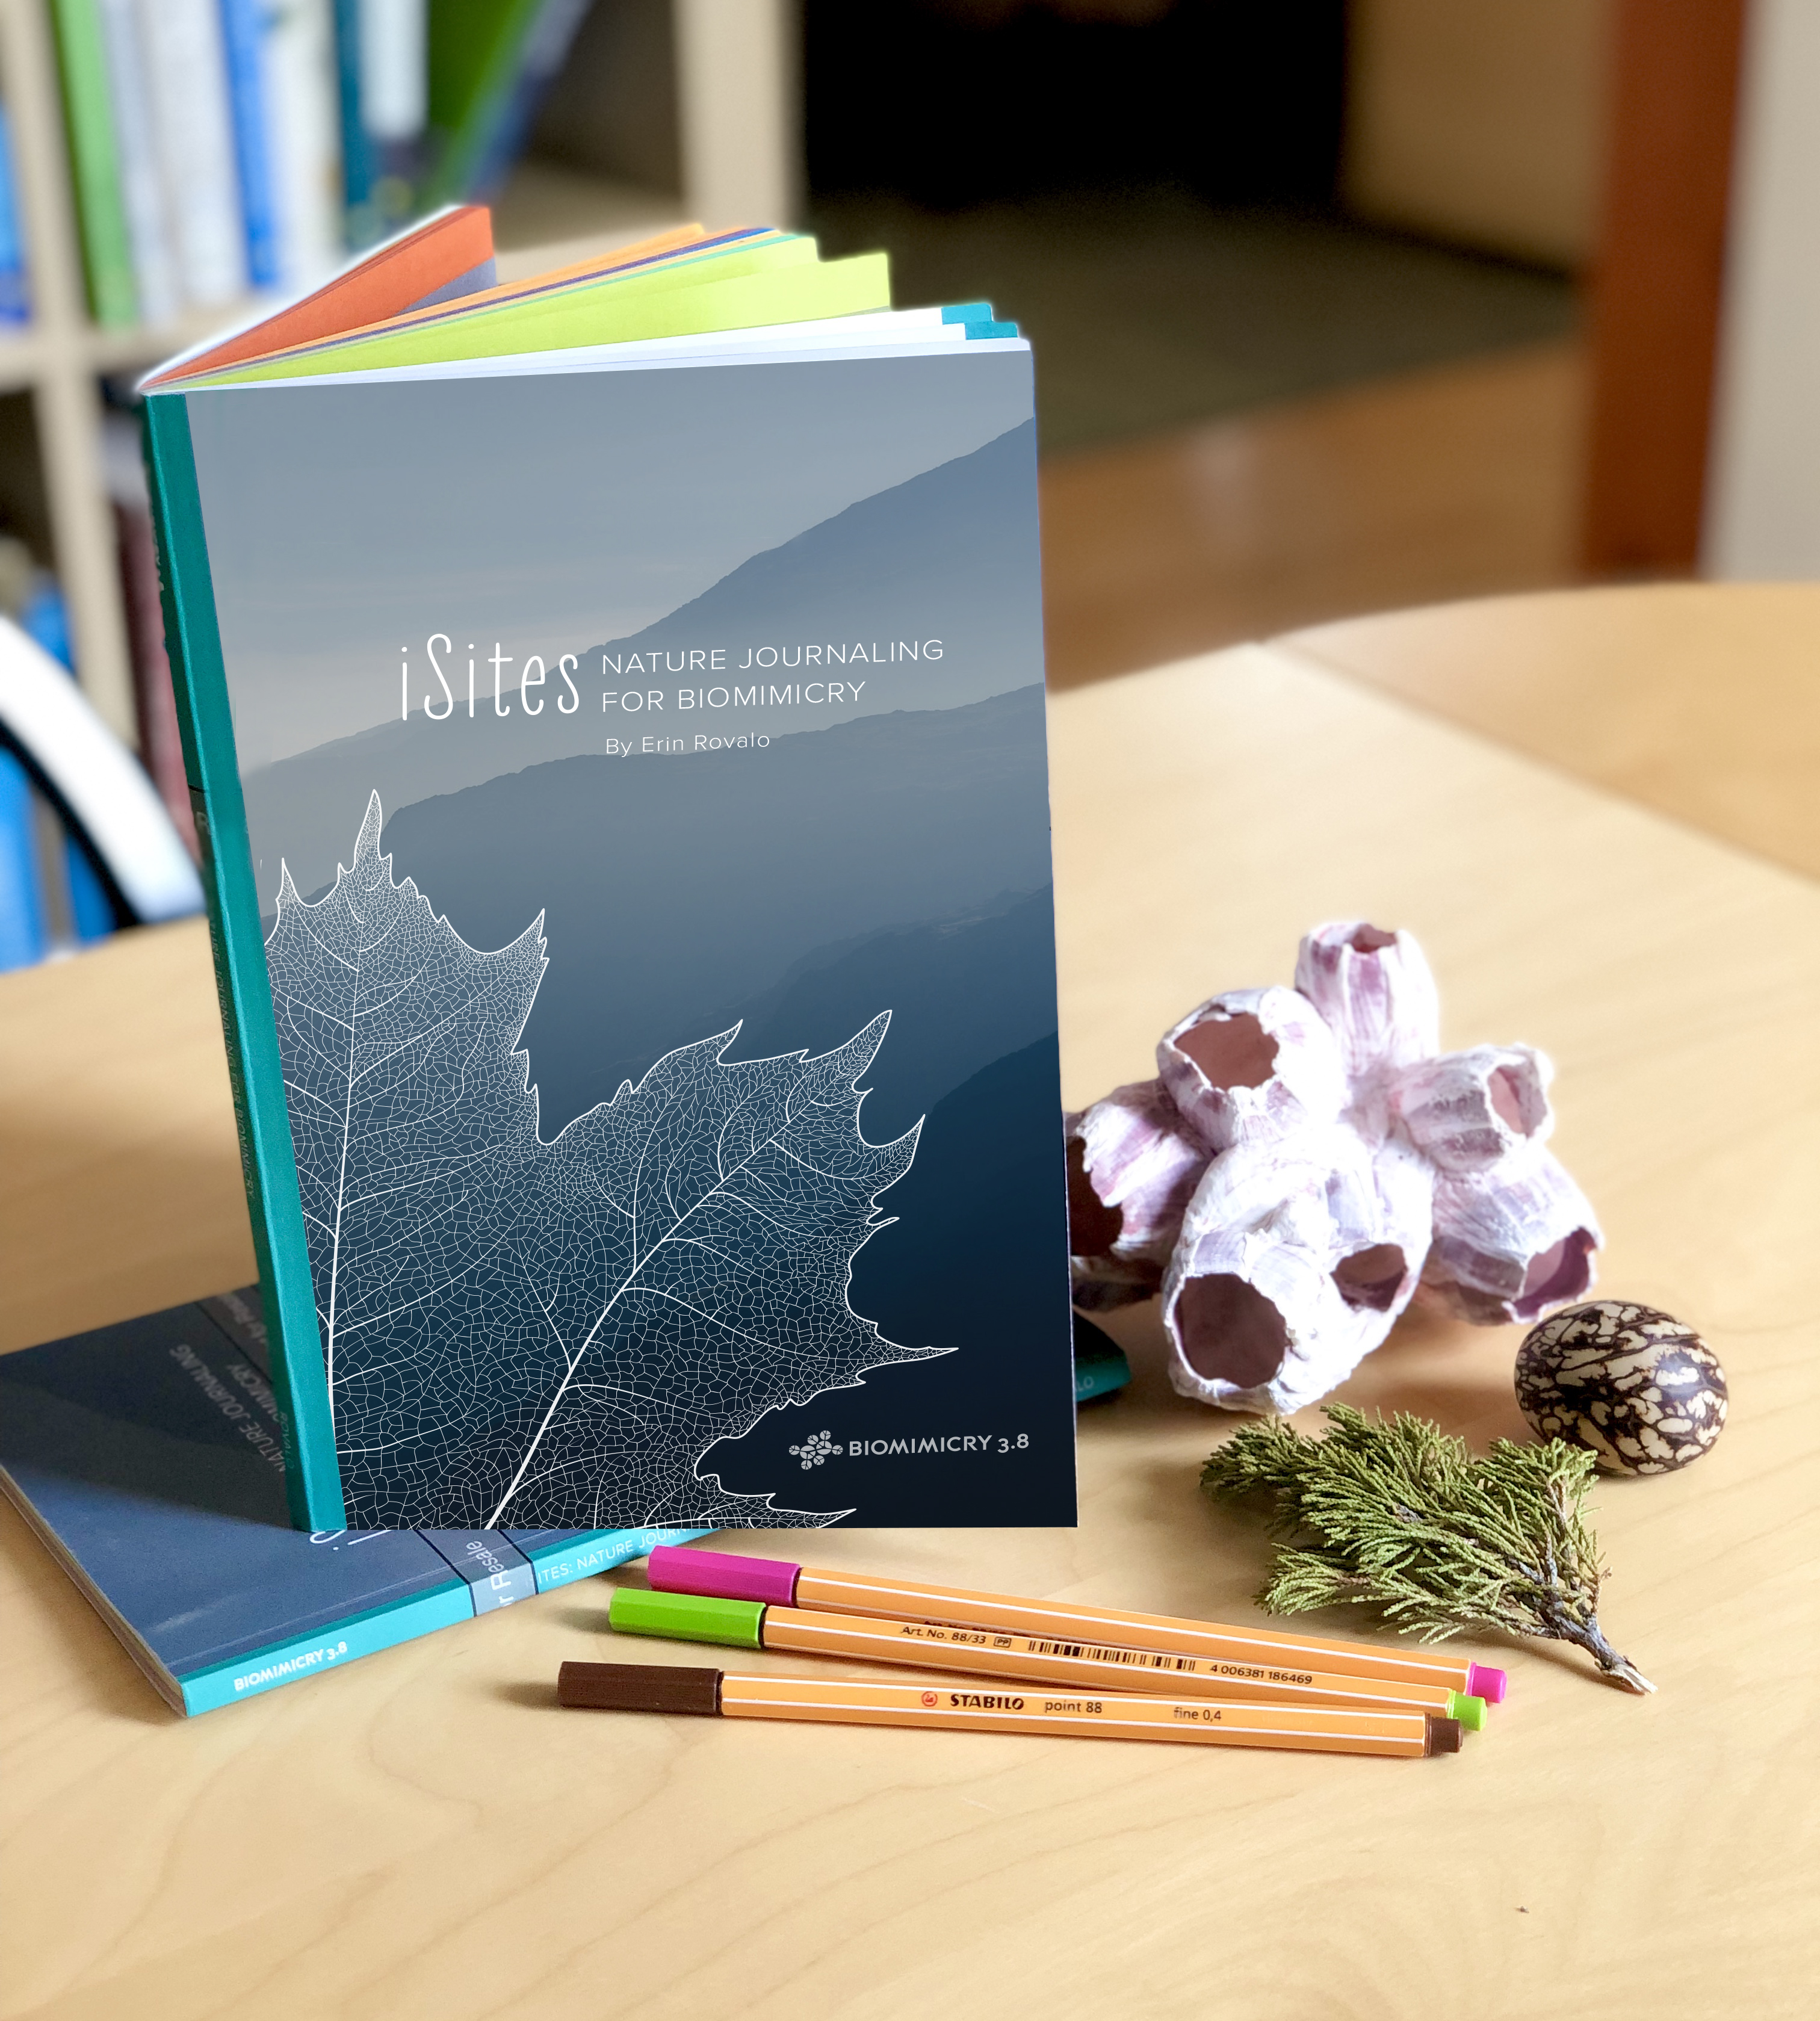 iSites: Nature Journaling for Biomimicry - Biomimicry 3.8